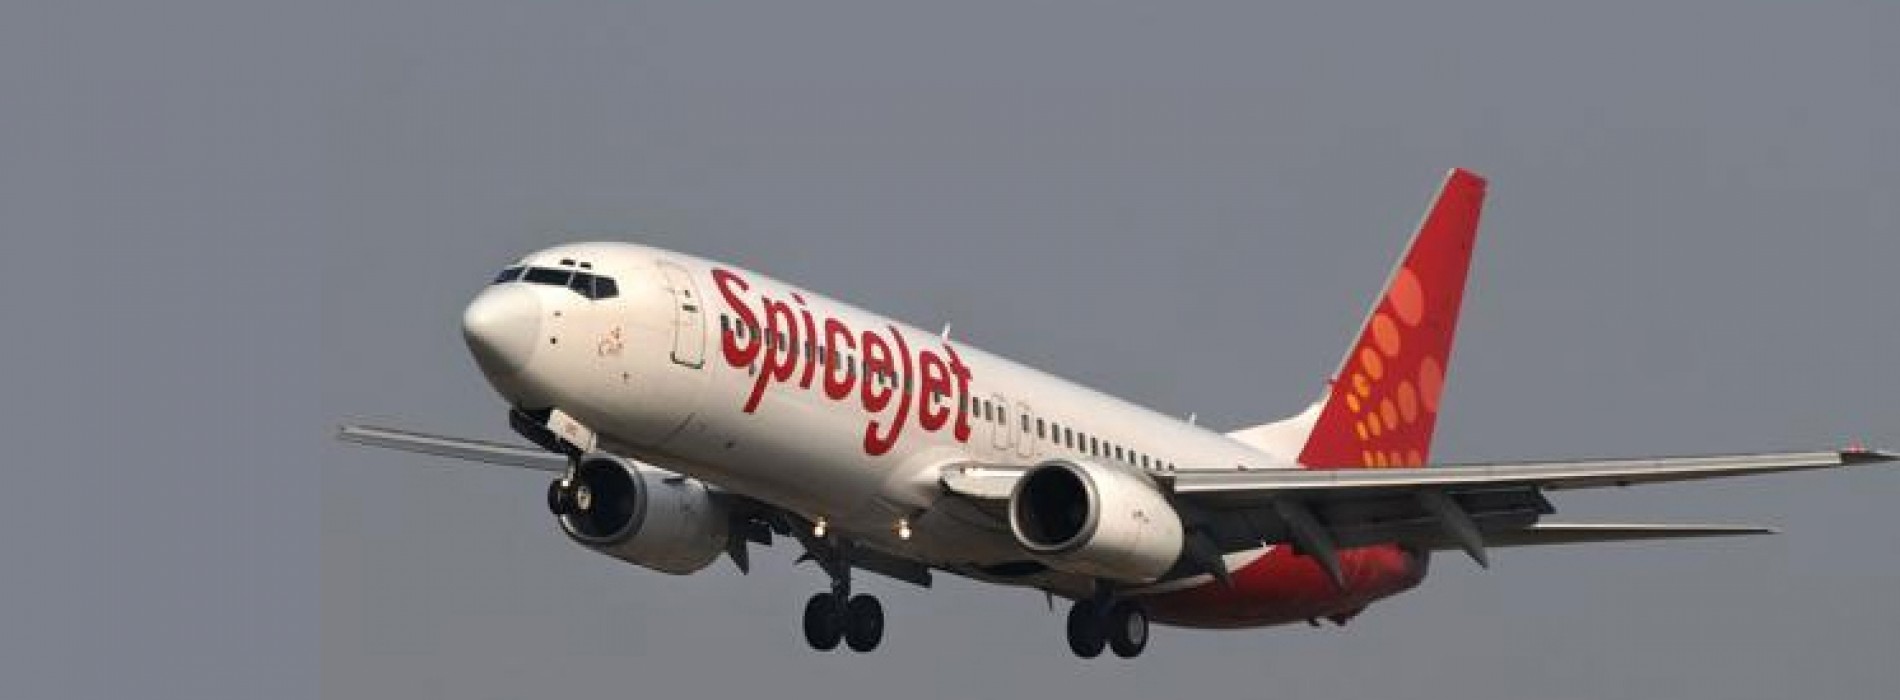 SpiceJet announces direct flights to Dubai from Amritsar and Kozhikode (Calicut)